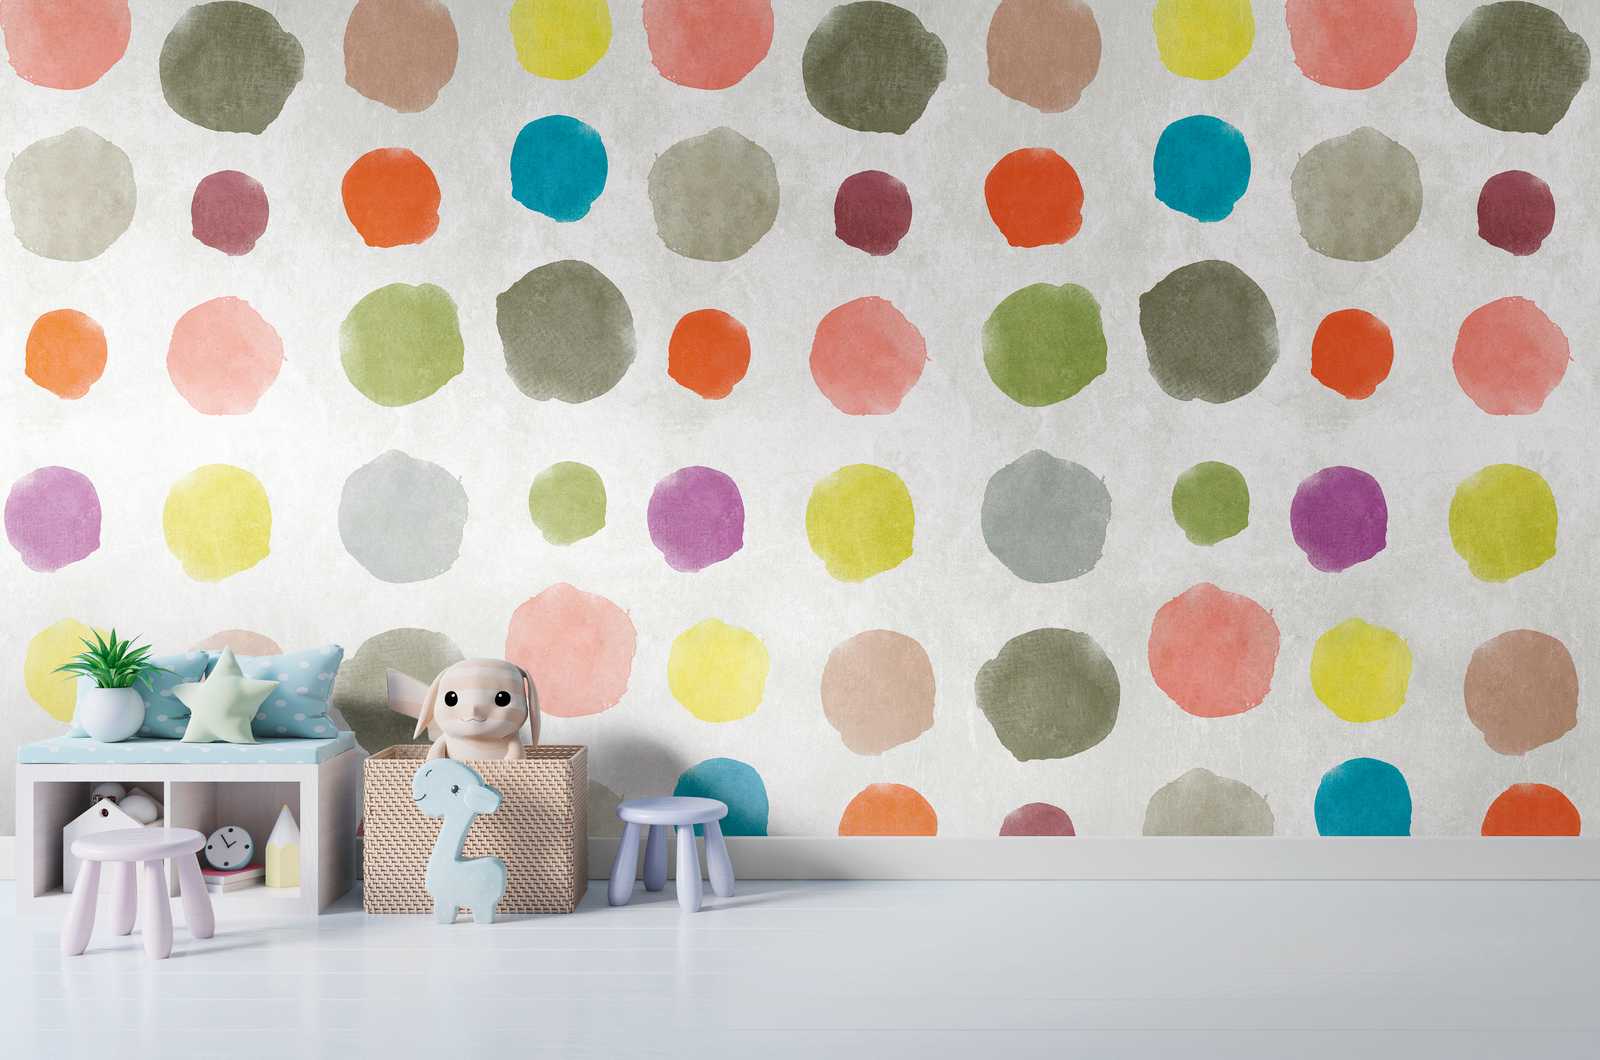             Wallpaper novelty | motif wallpaper colourful dots in watercolour & used look
        